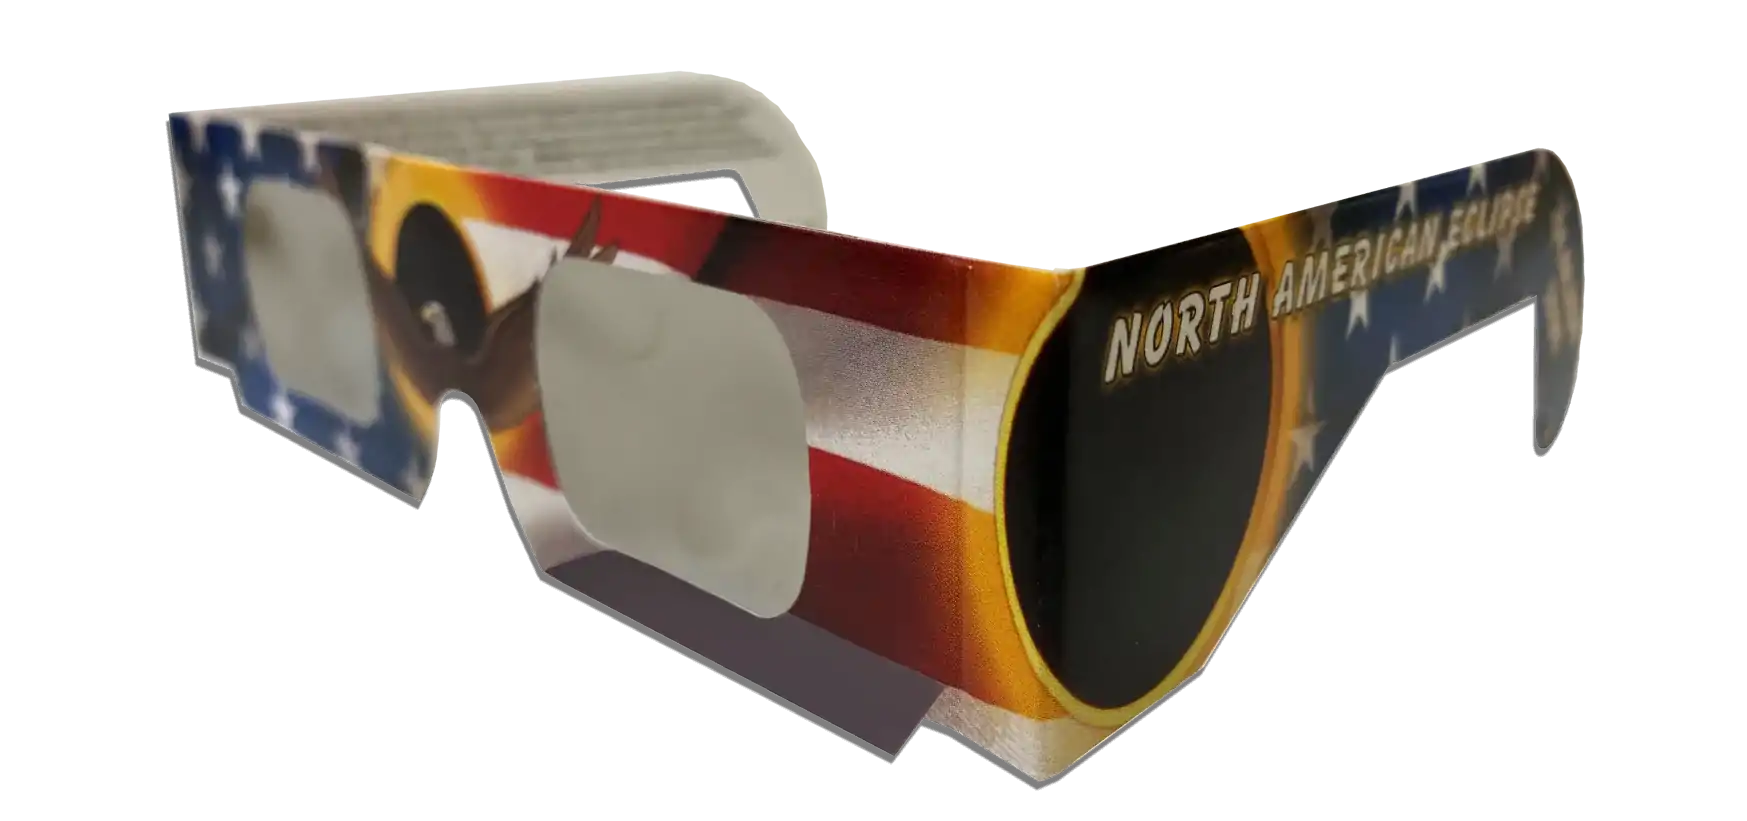 stock photo of patriotic eclipse glasses for sale, featuring the USA flag and bald eagle